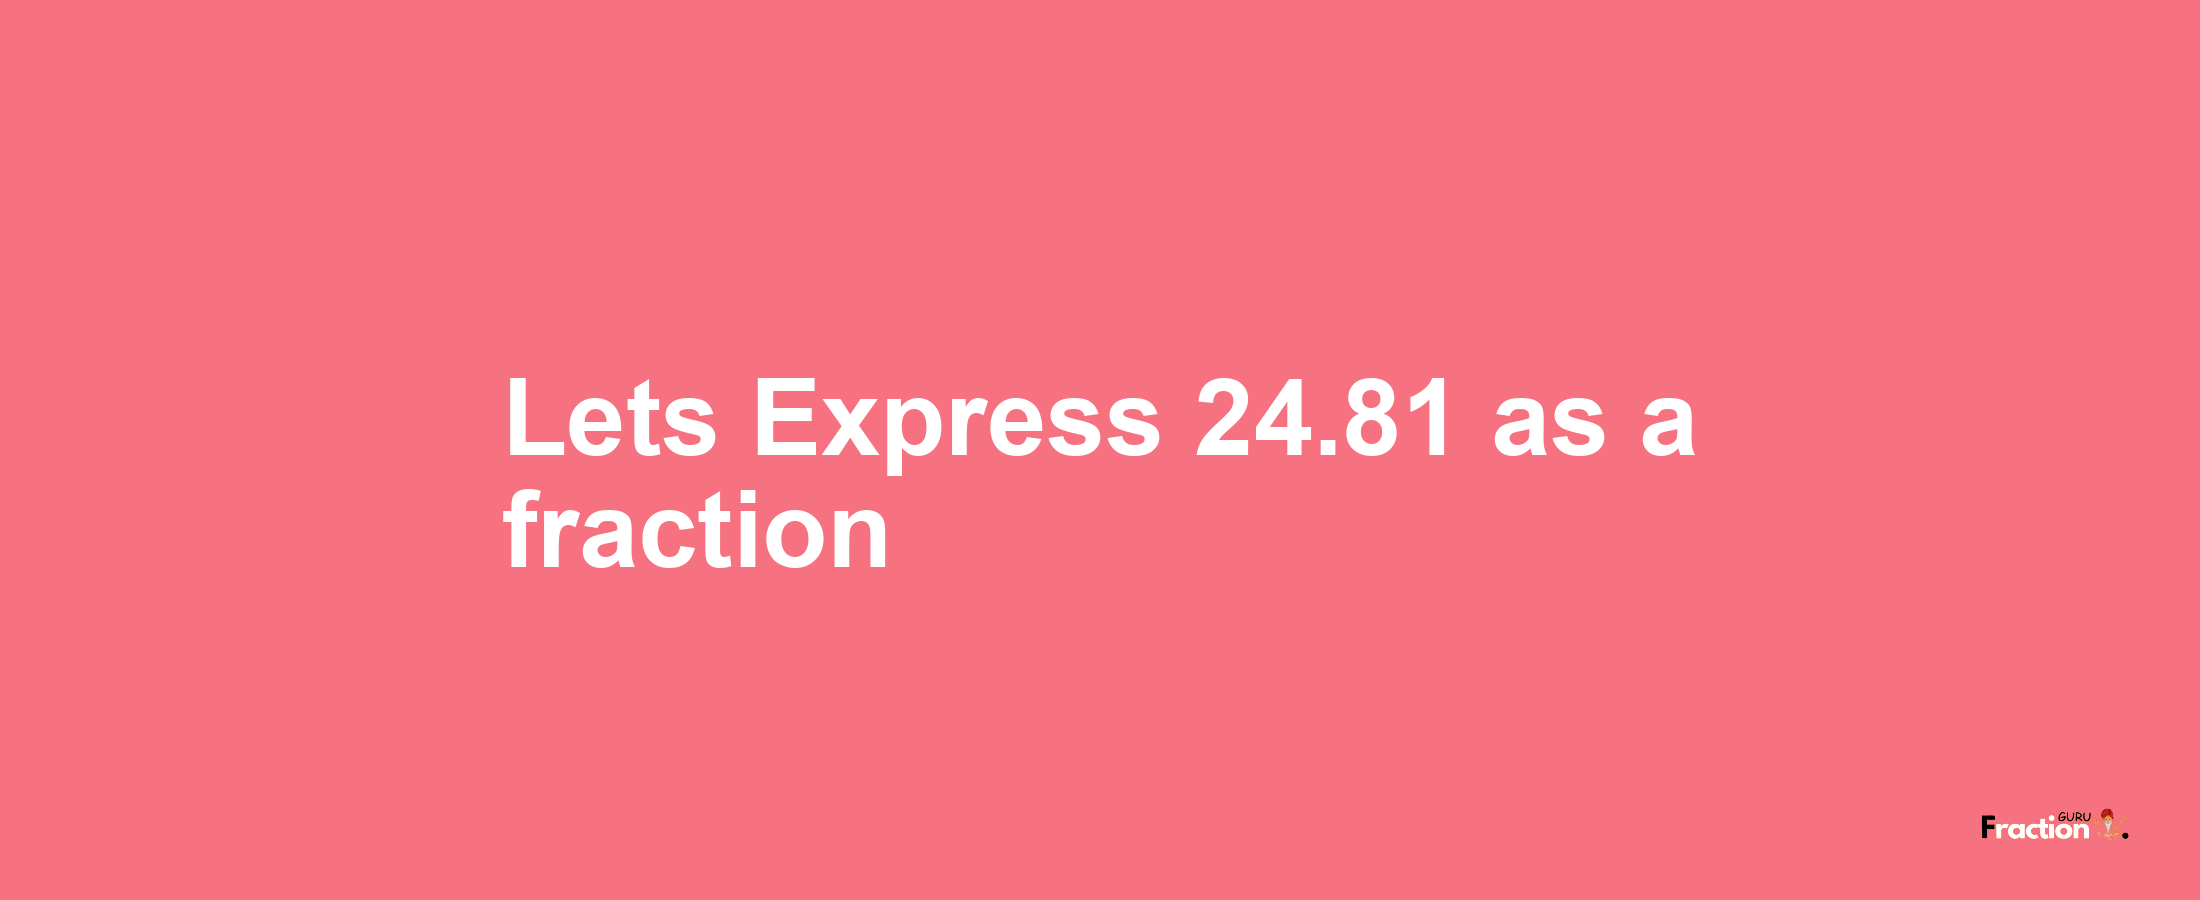 Lets Express 24.81 as afraction